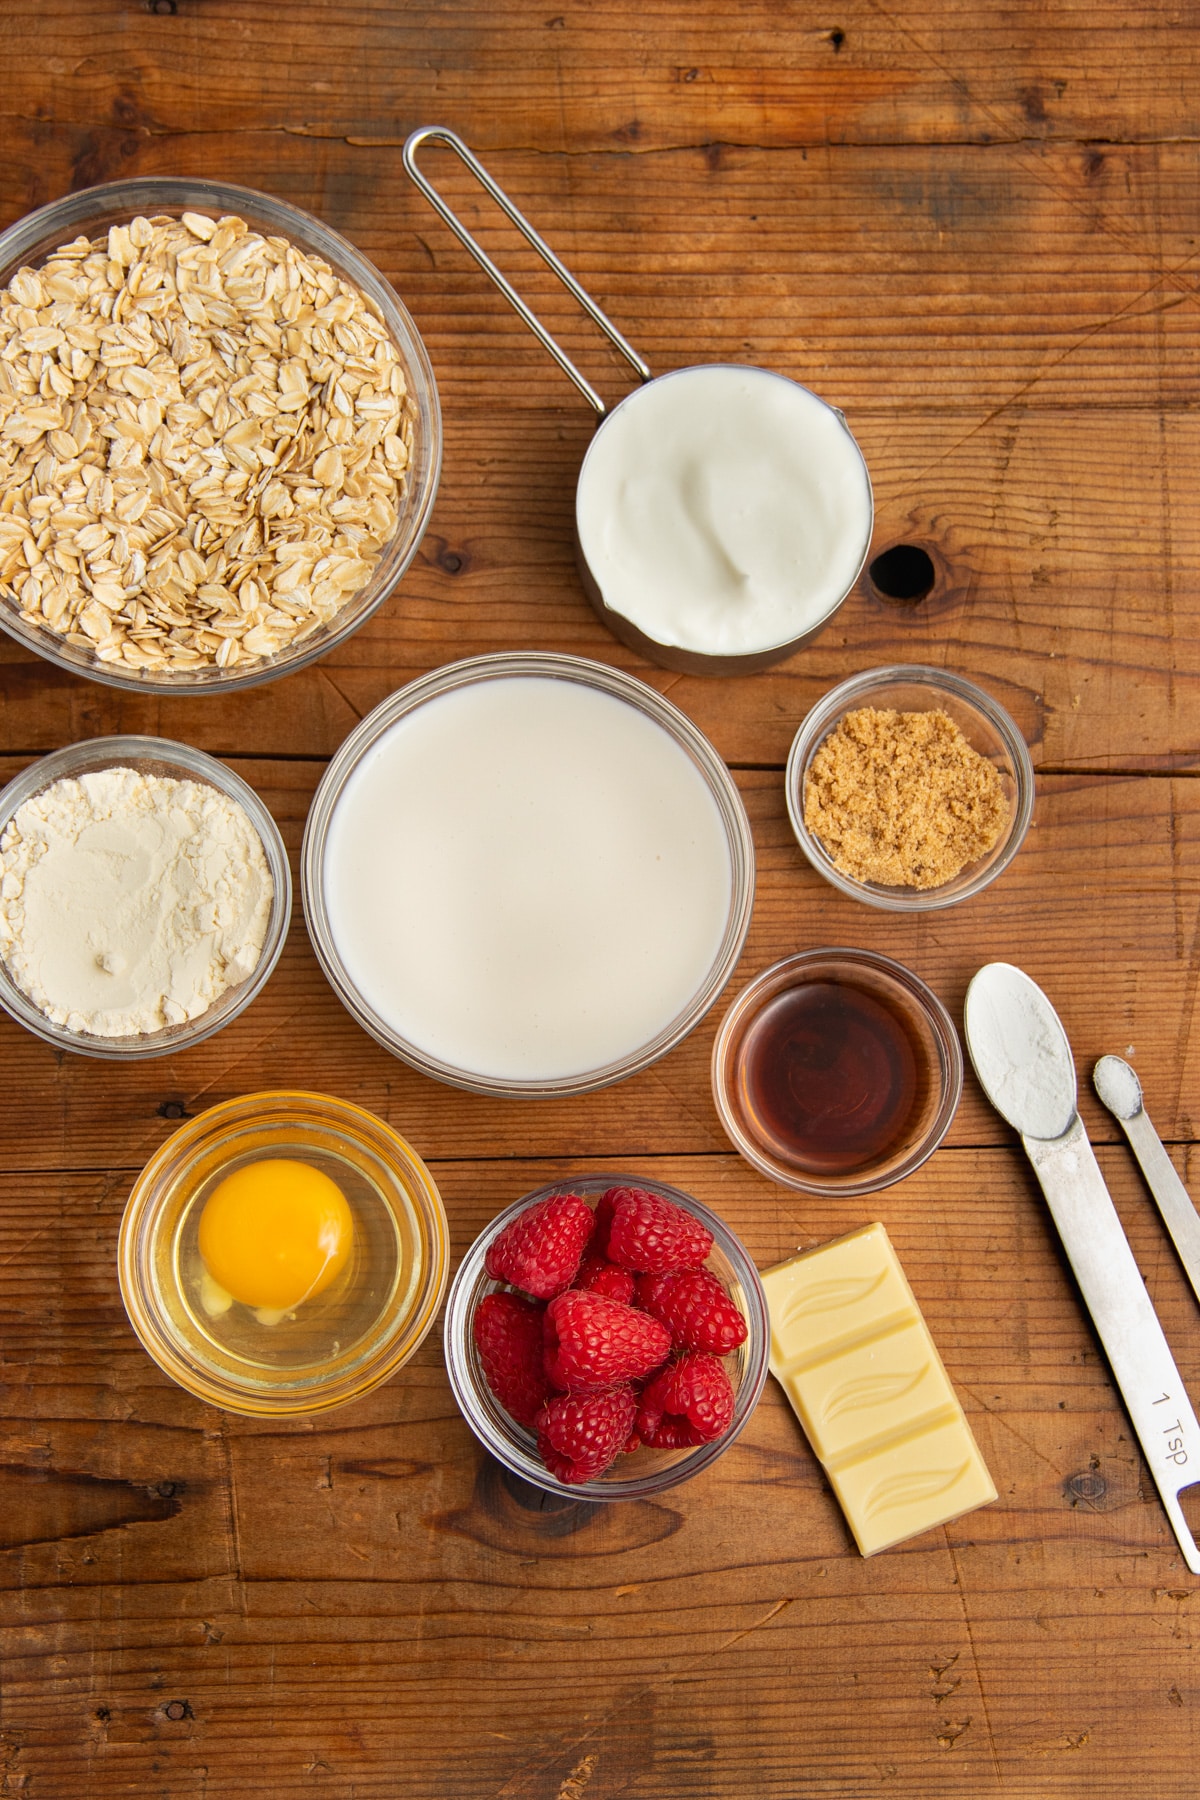 This is a picture of all the individual ingredients to make this oat recipe.